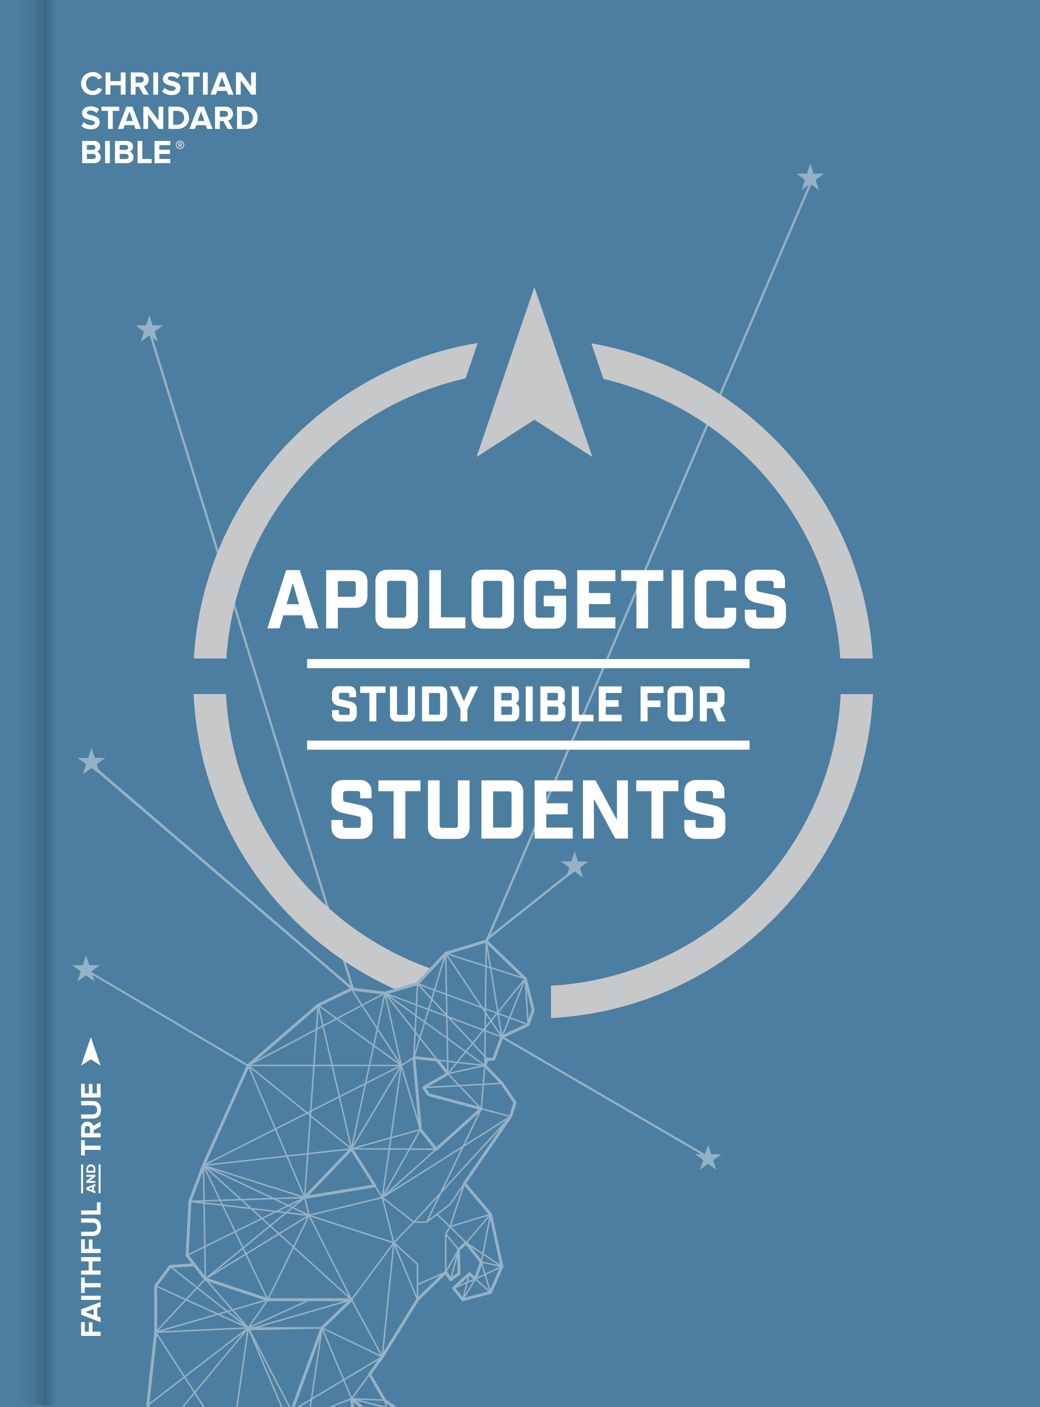 CSB Apologetics Study Bible for Students, Hardcover